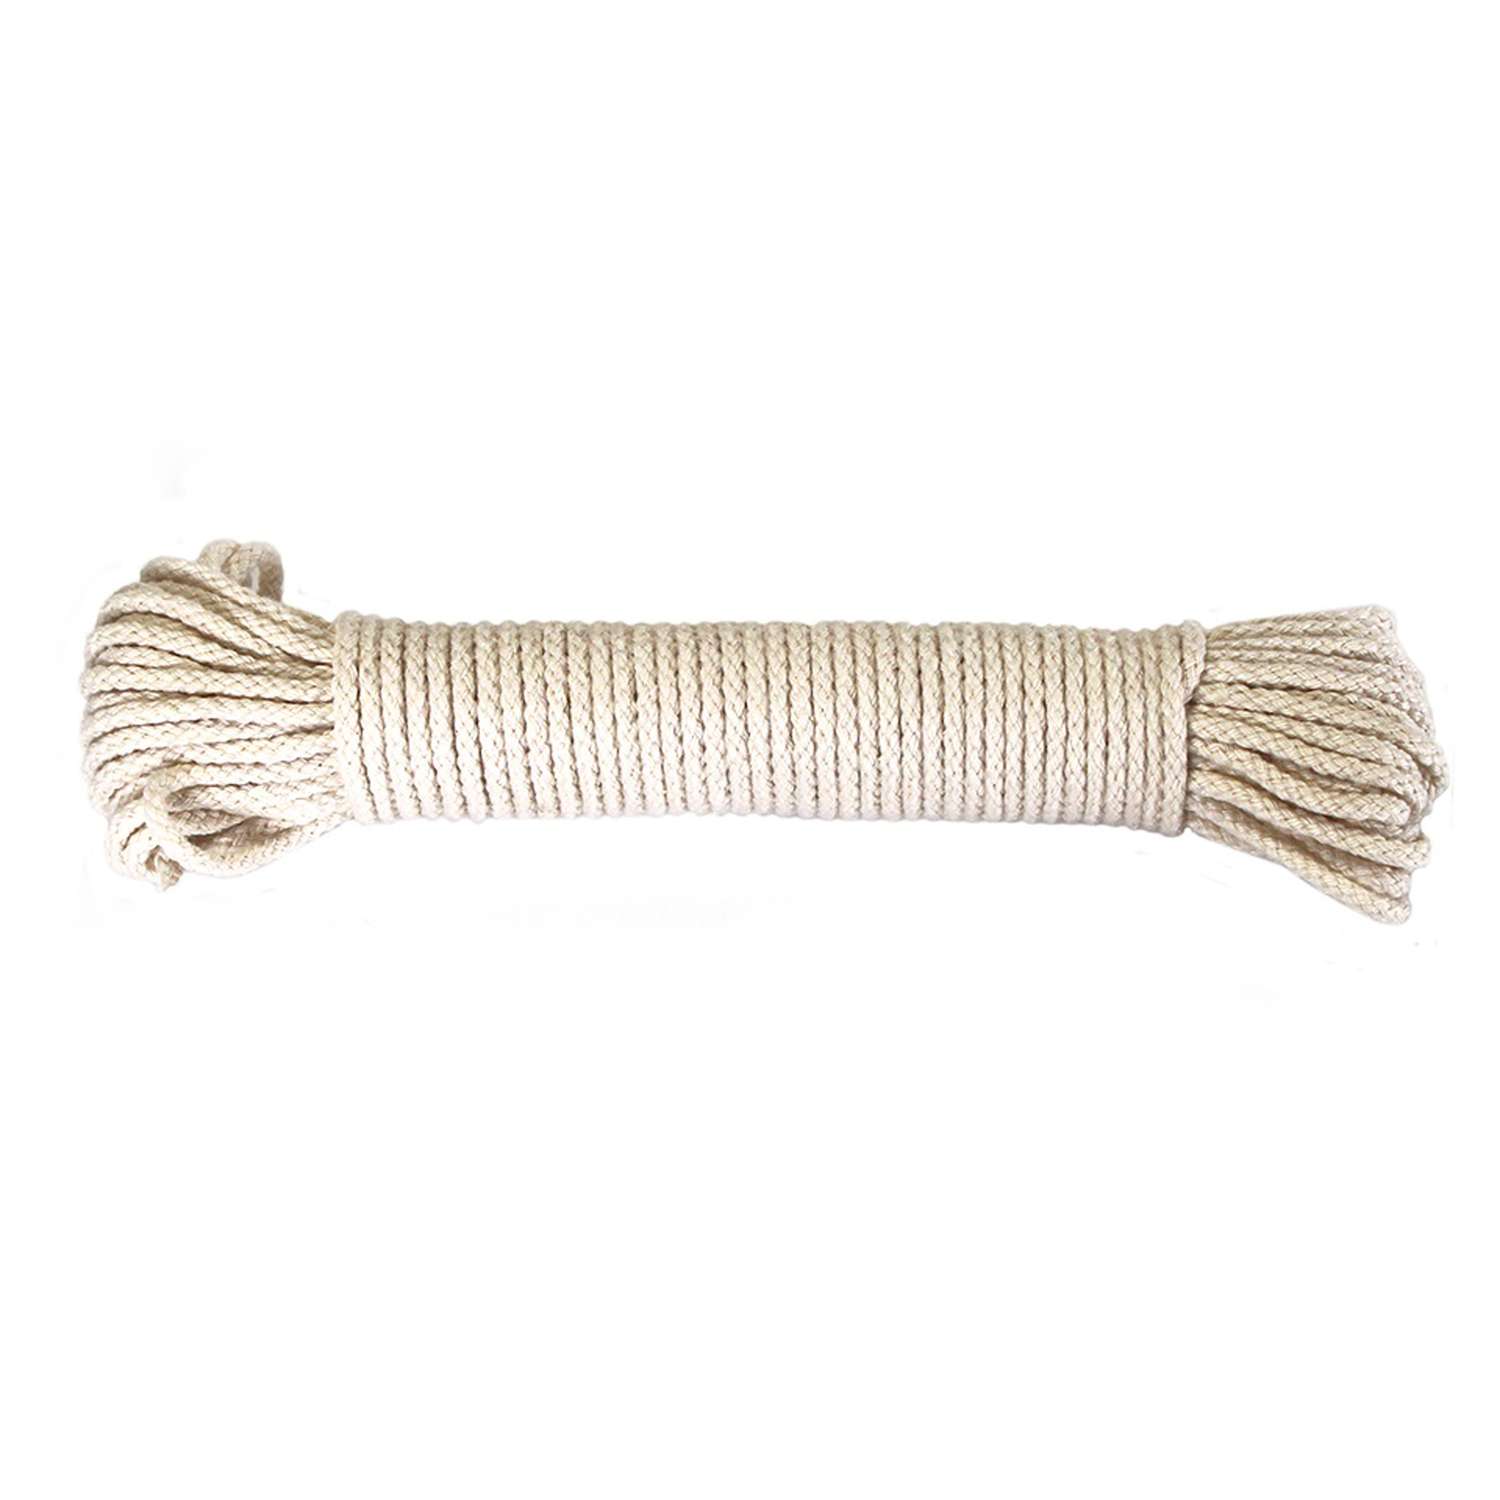 Ace 7/64 in. D X 48 ft. L White Braided Cotton Cord - Ace Hardware